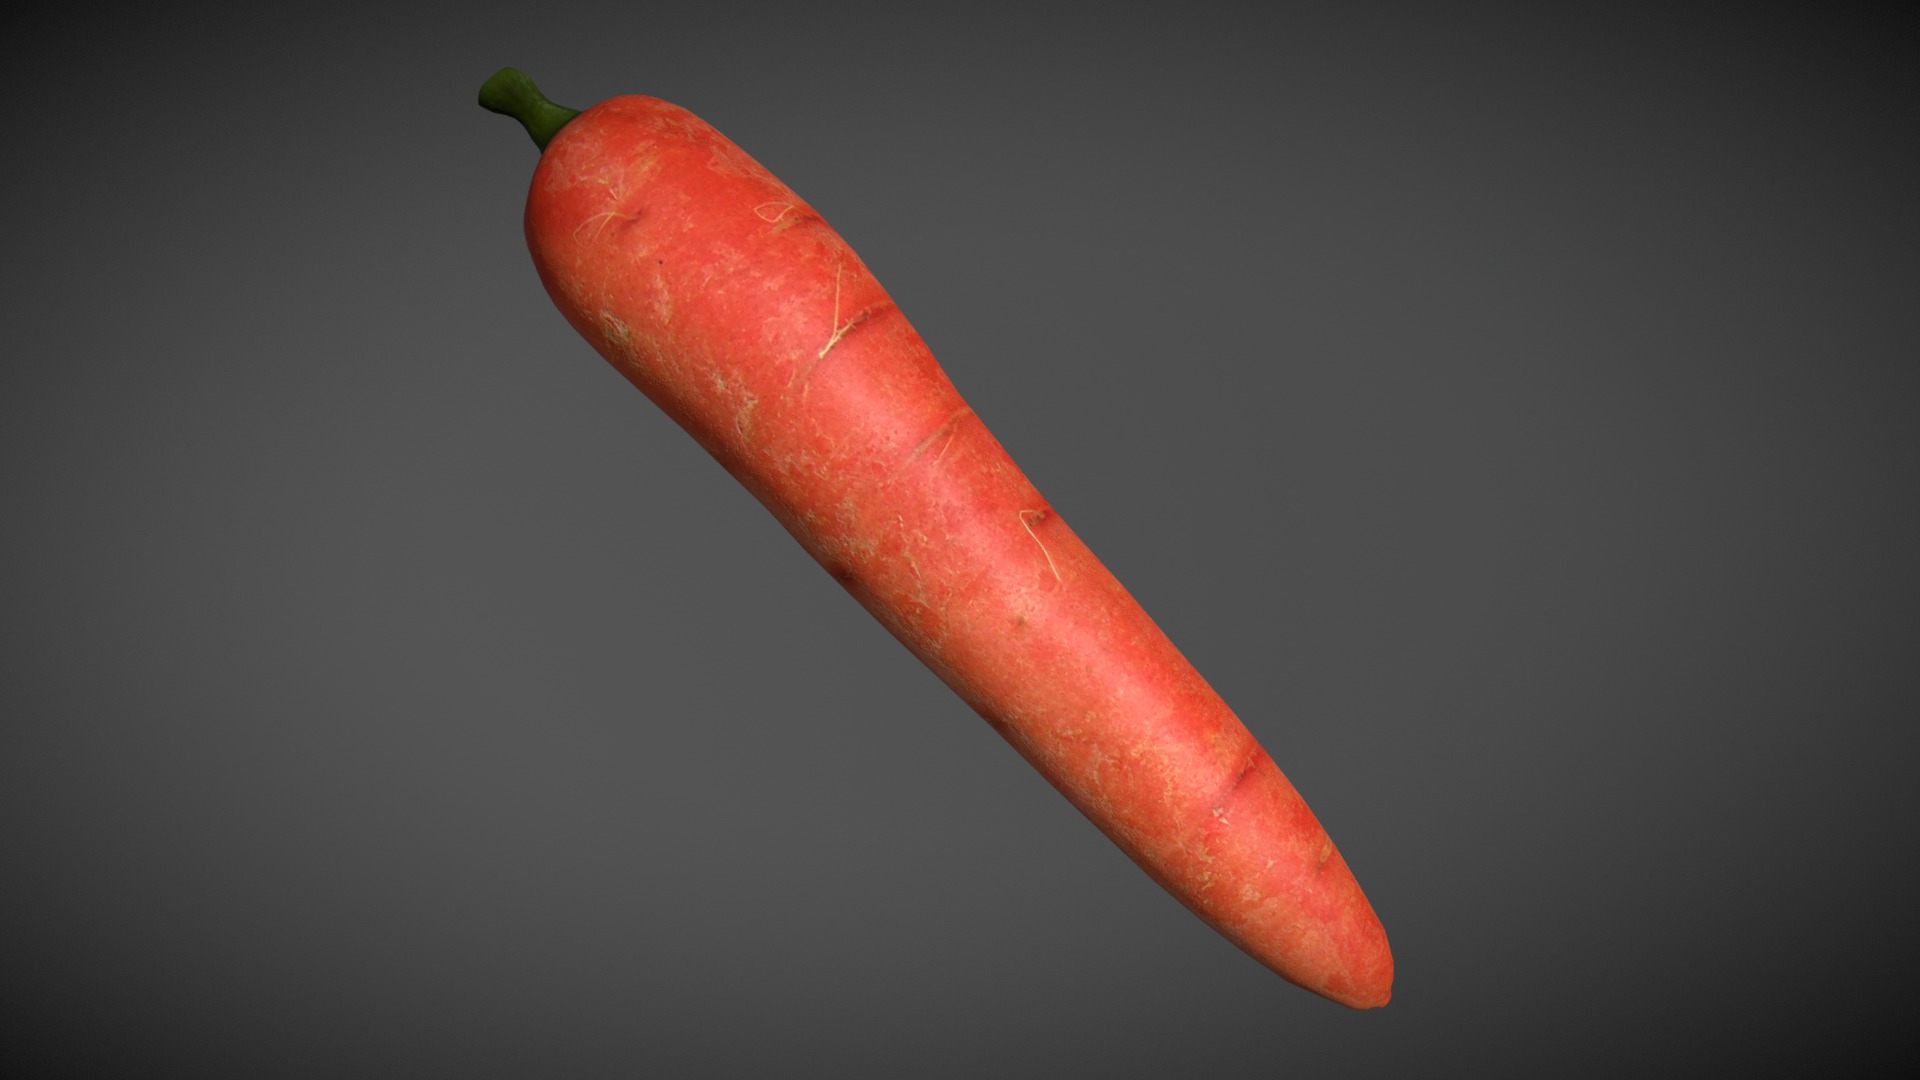 3D model Carrot - This is a 3D model of the Carrot. The 3D model is about a red carrot with a green stem.